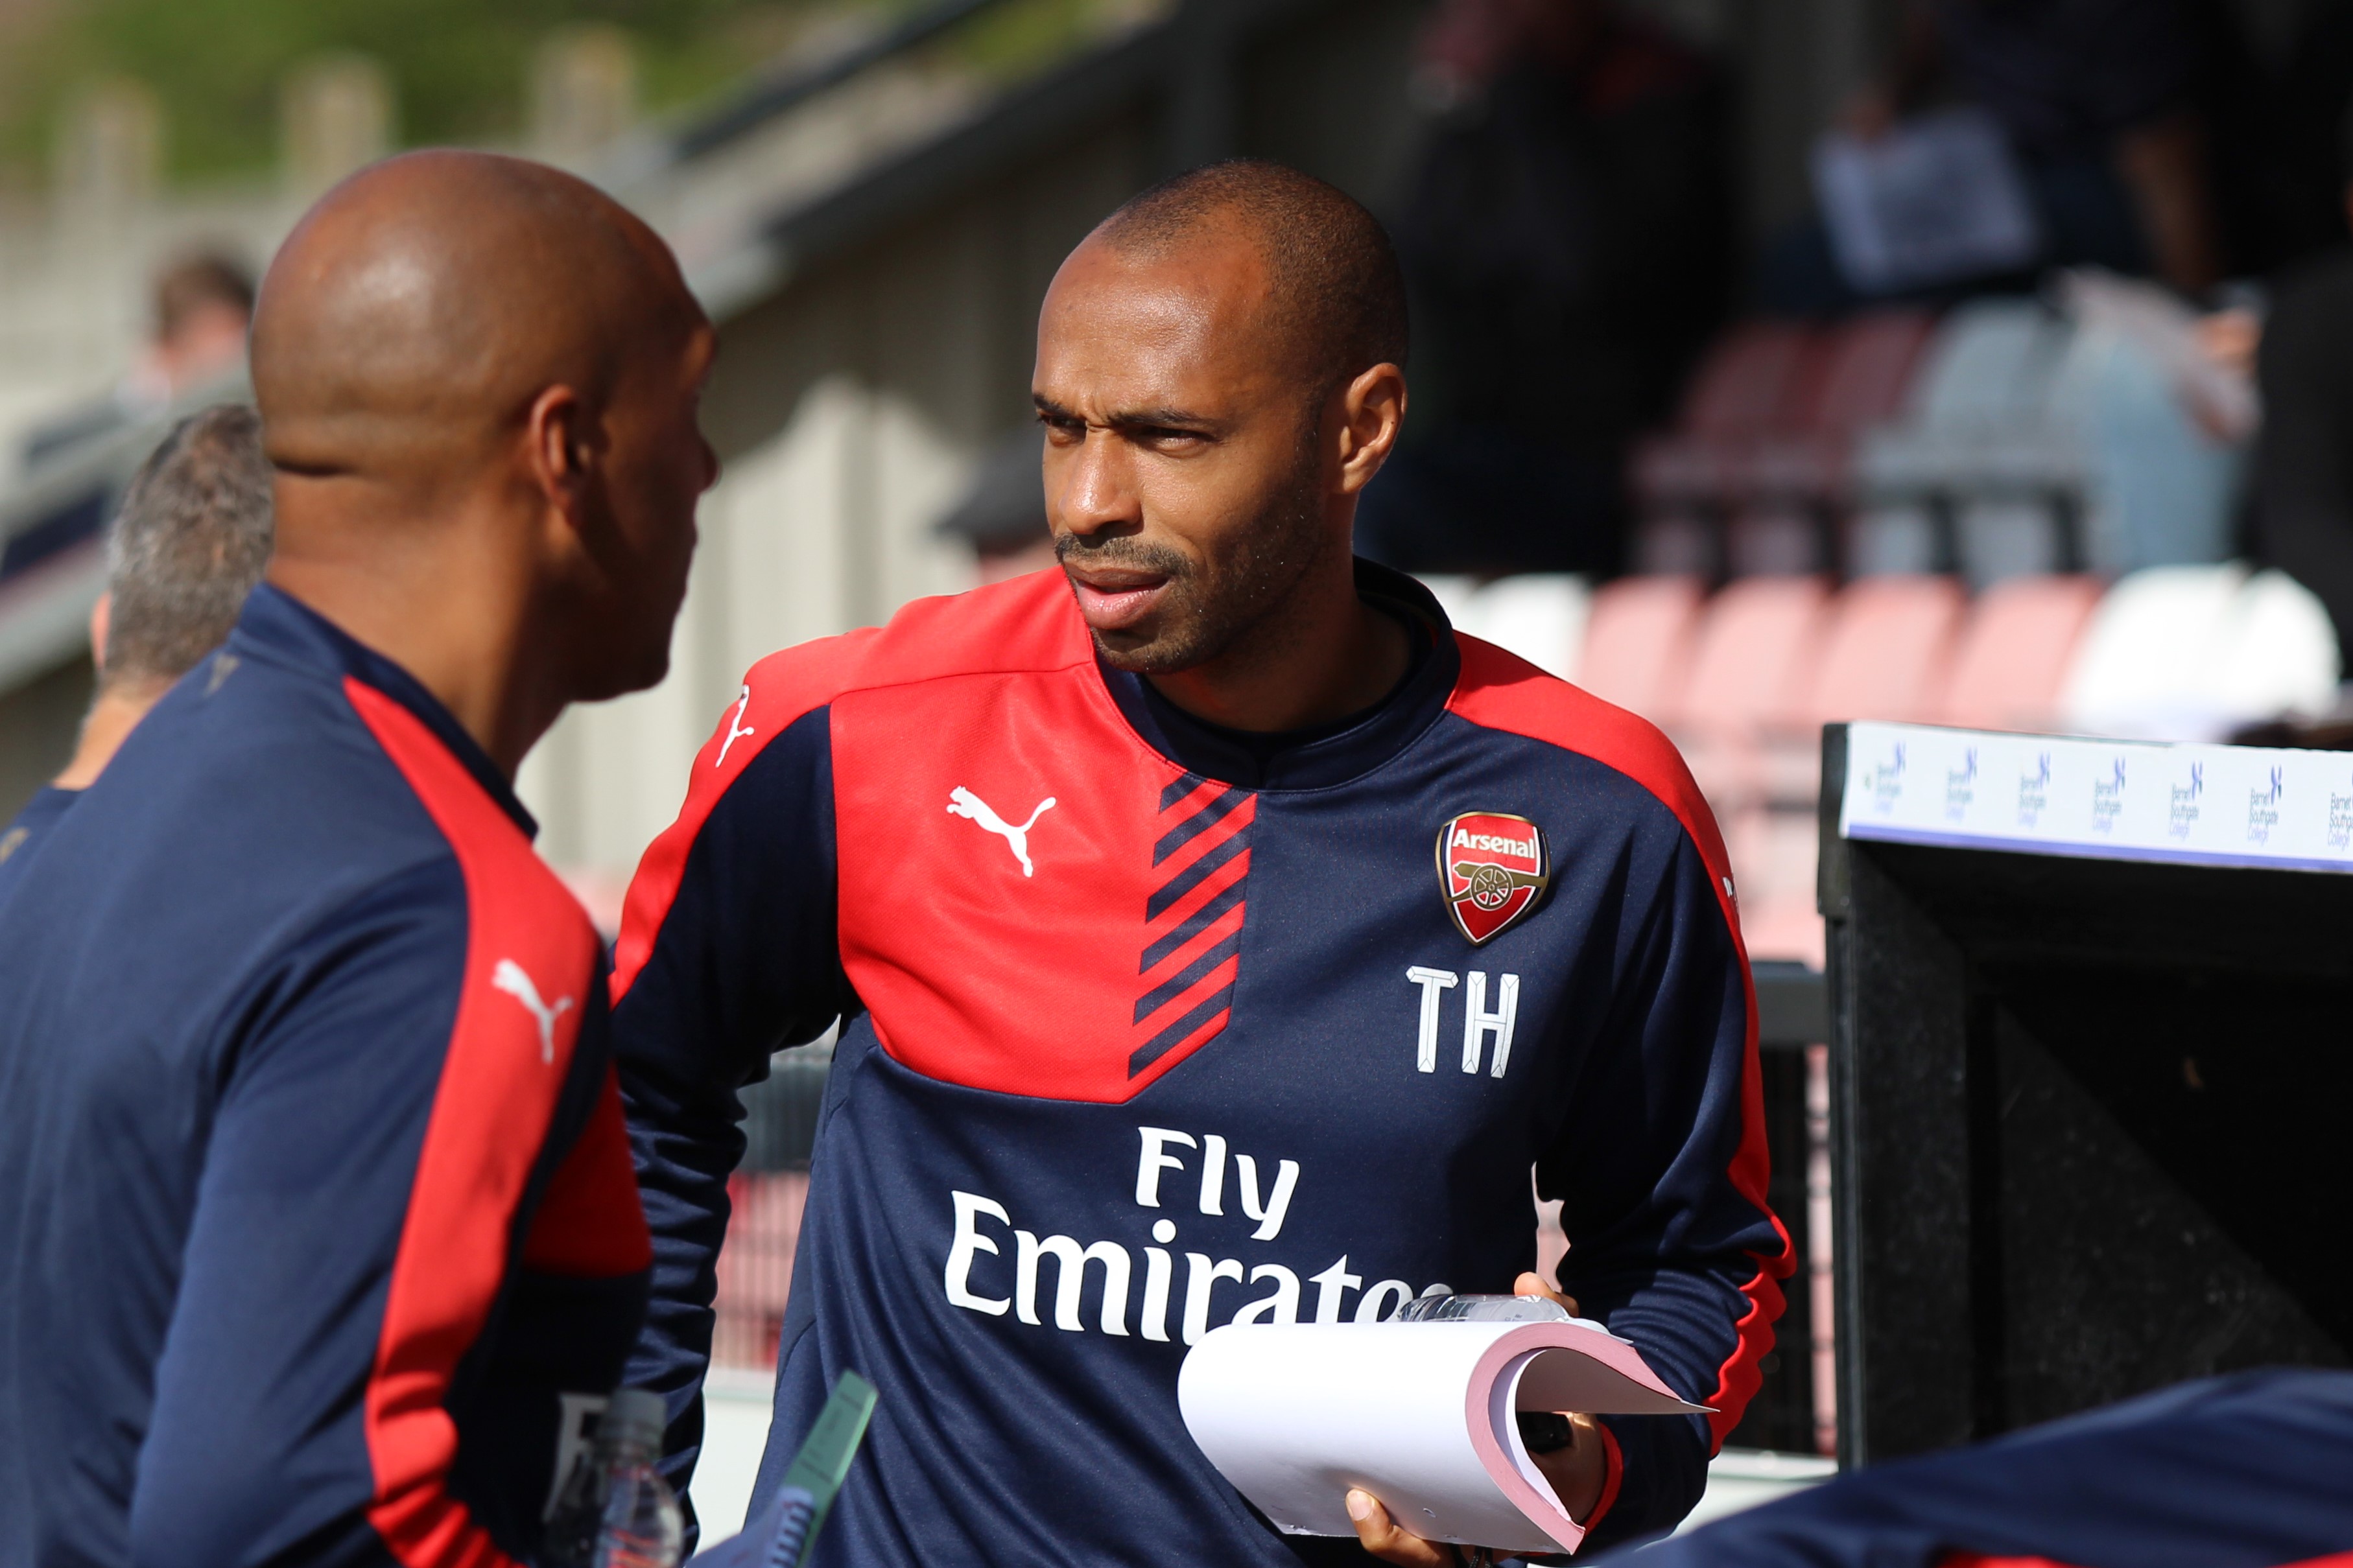 thierry henry arsenal